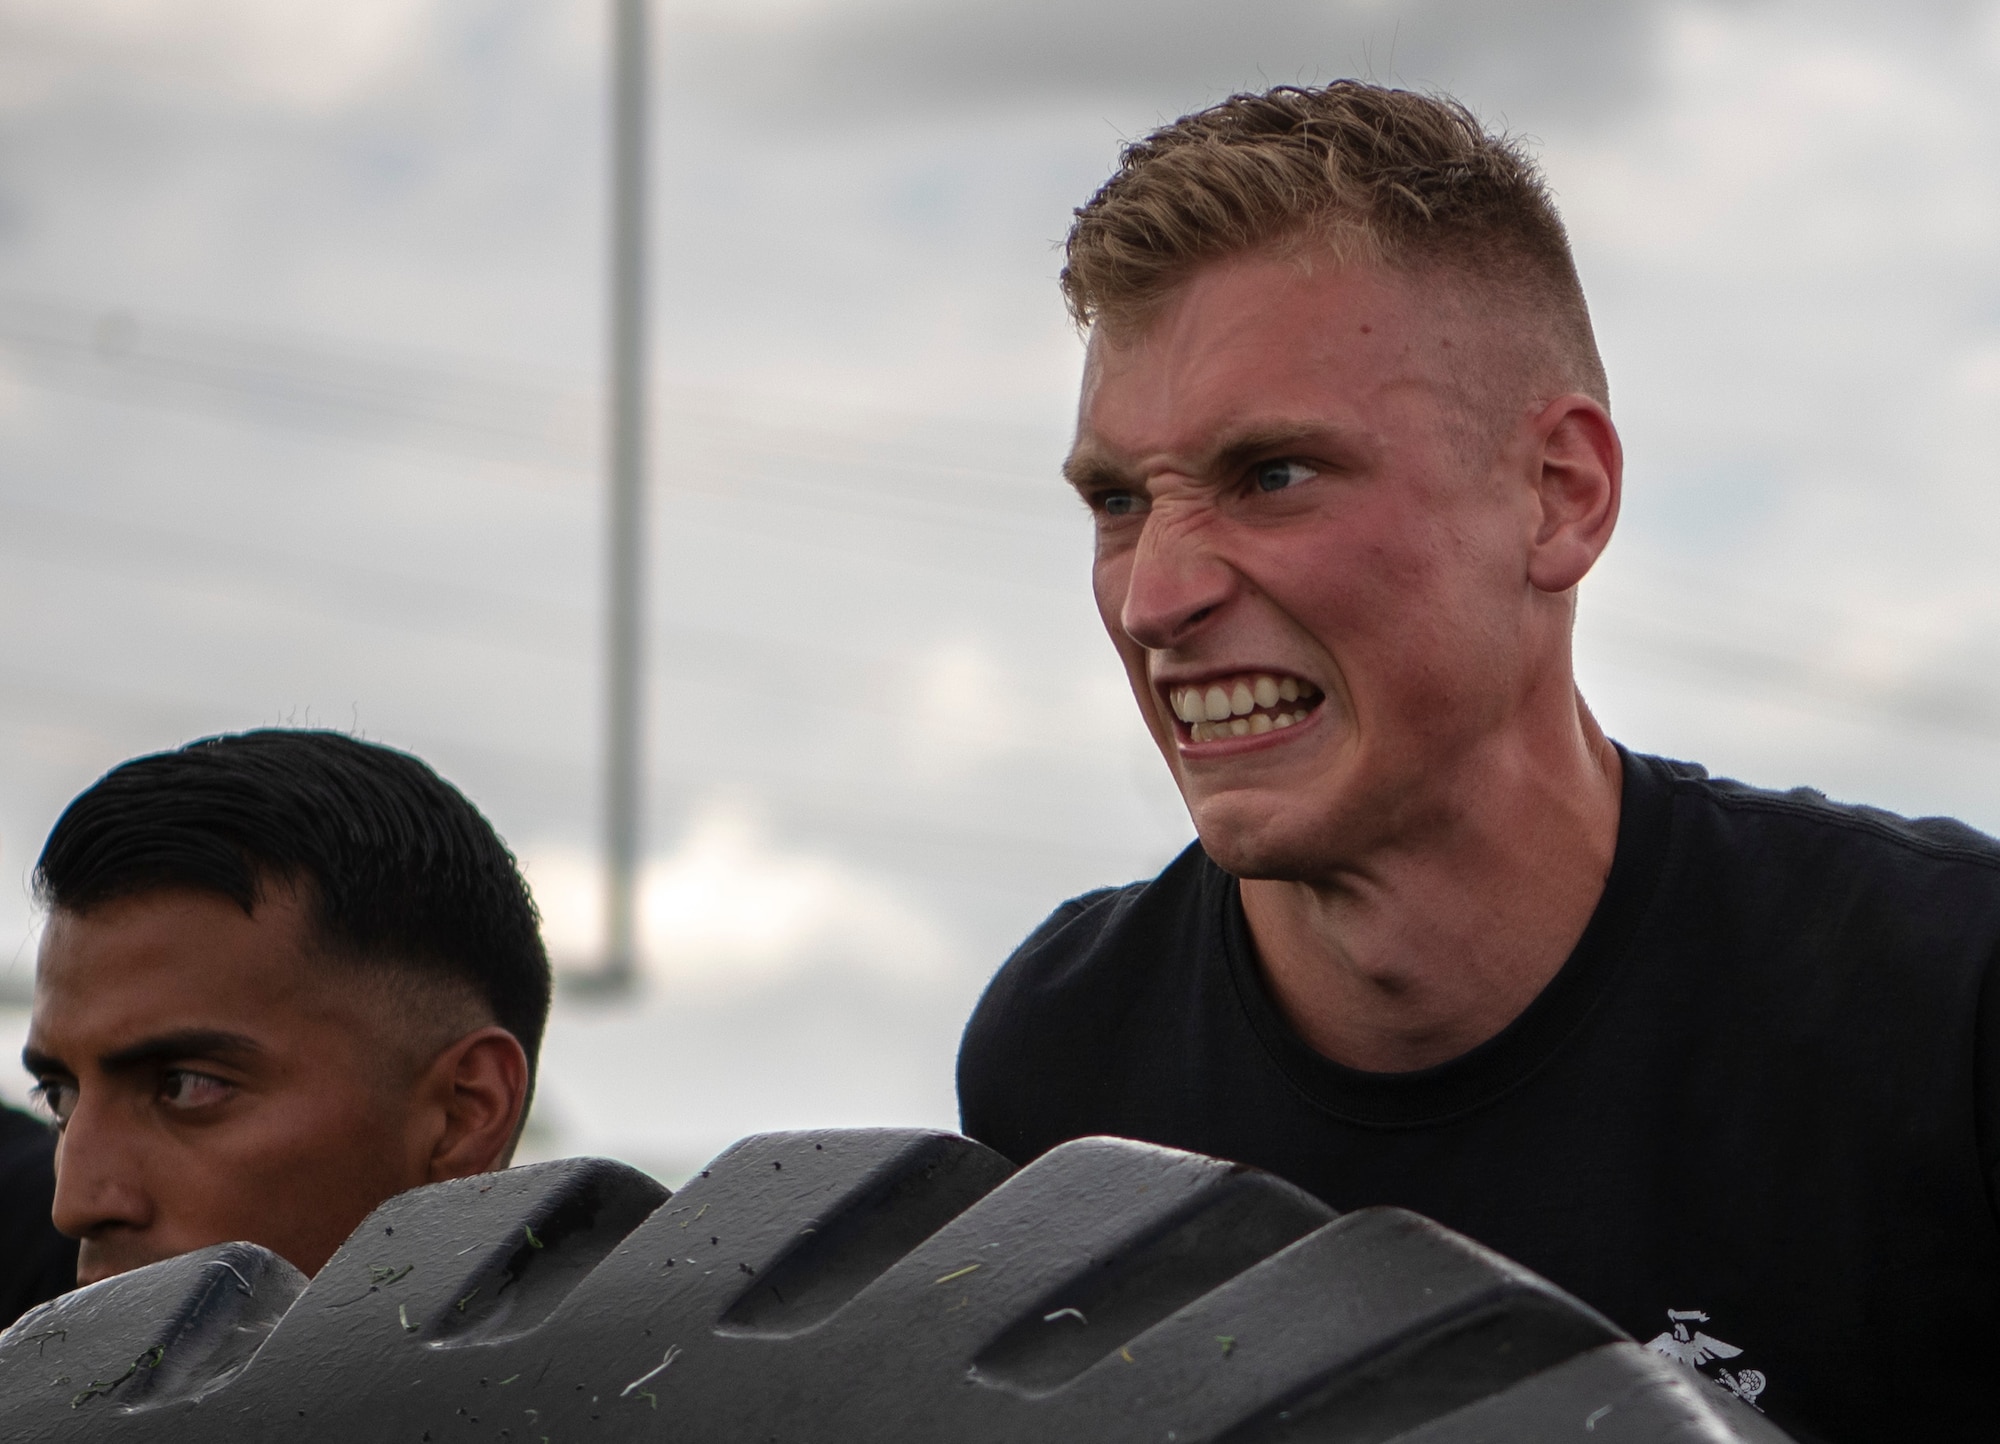 Det. 1 Marines test strength at Team Dyess Sports Day